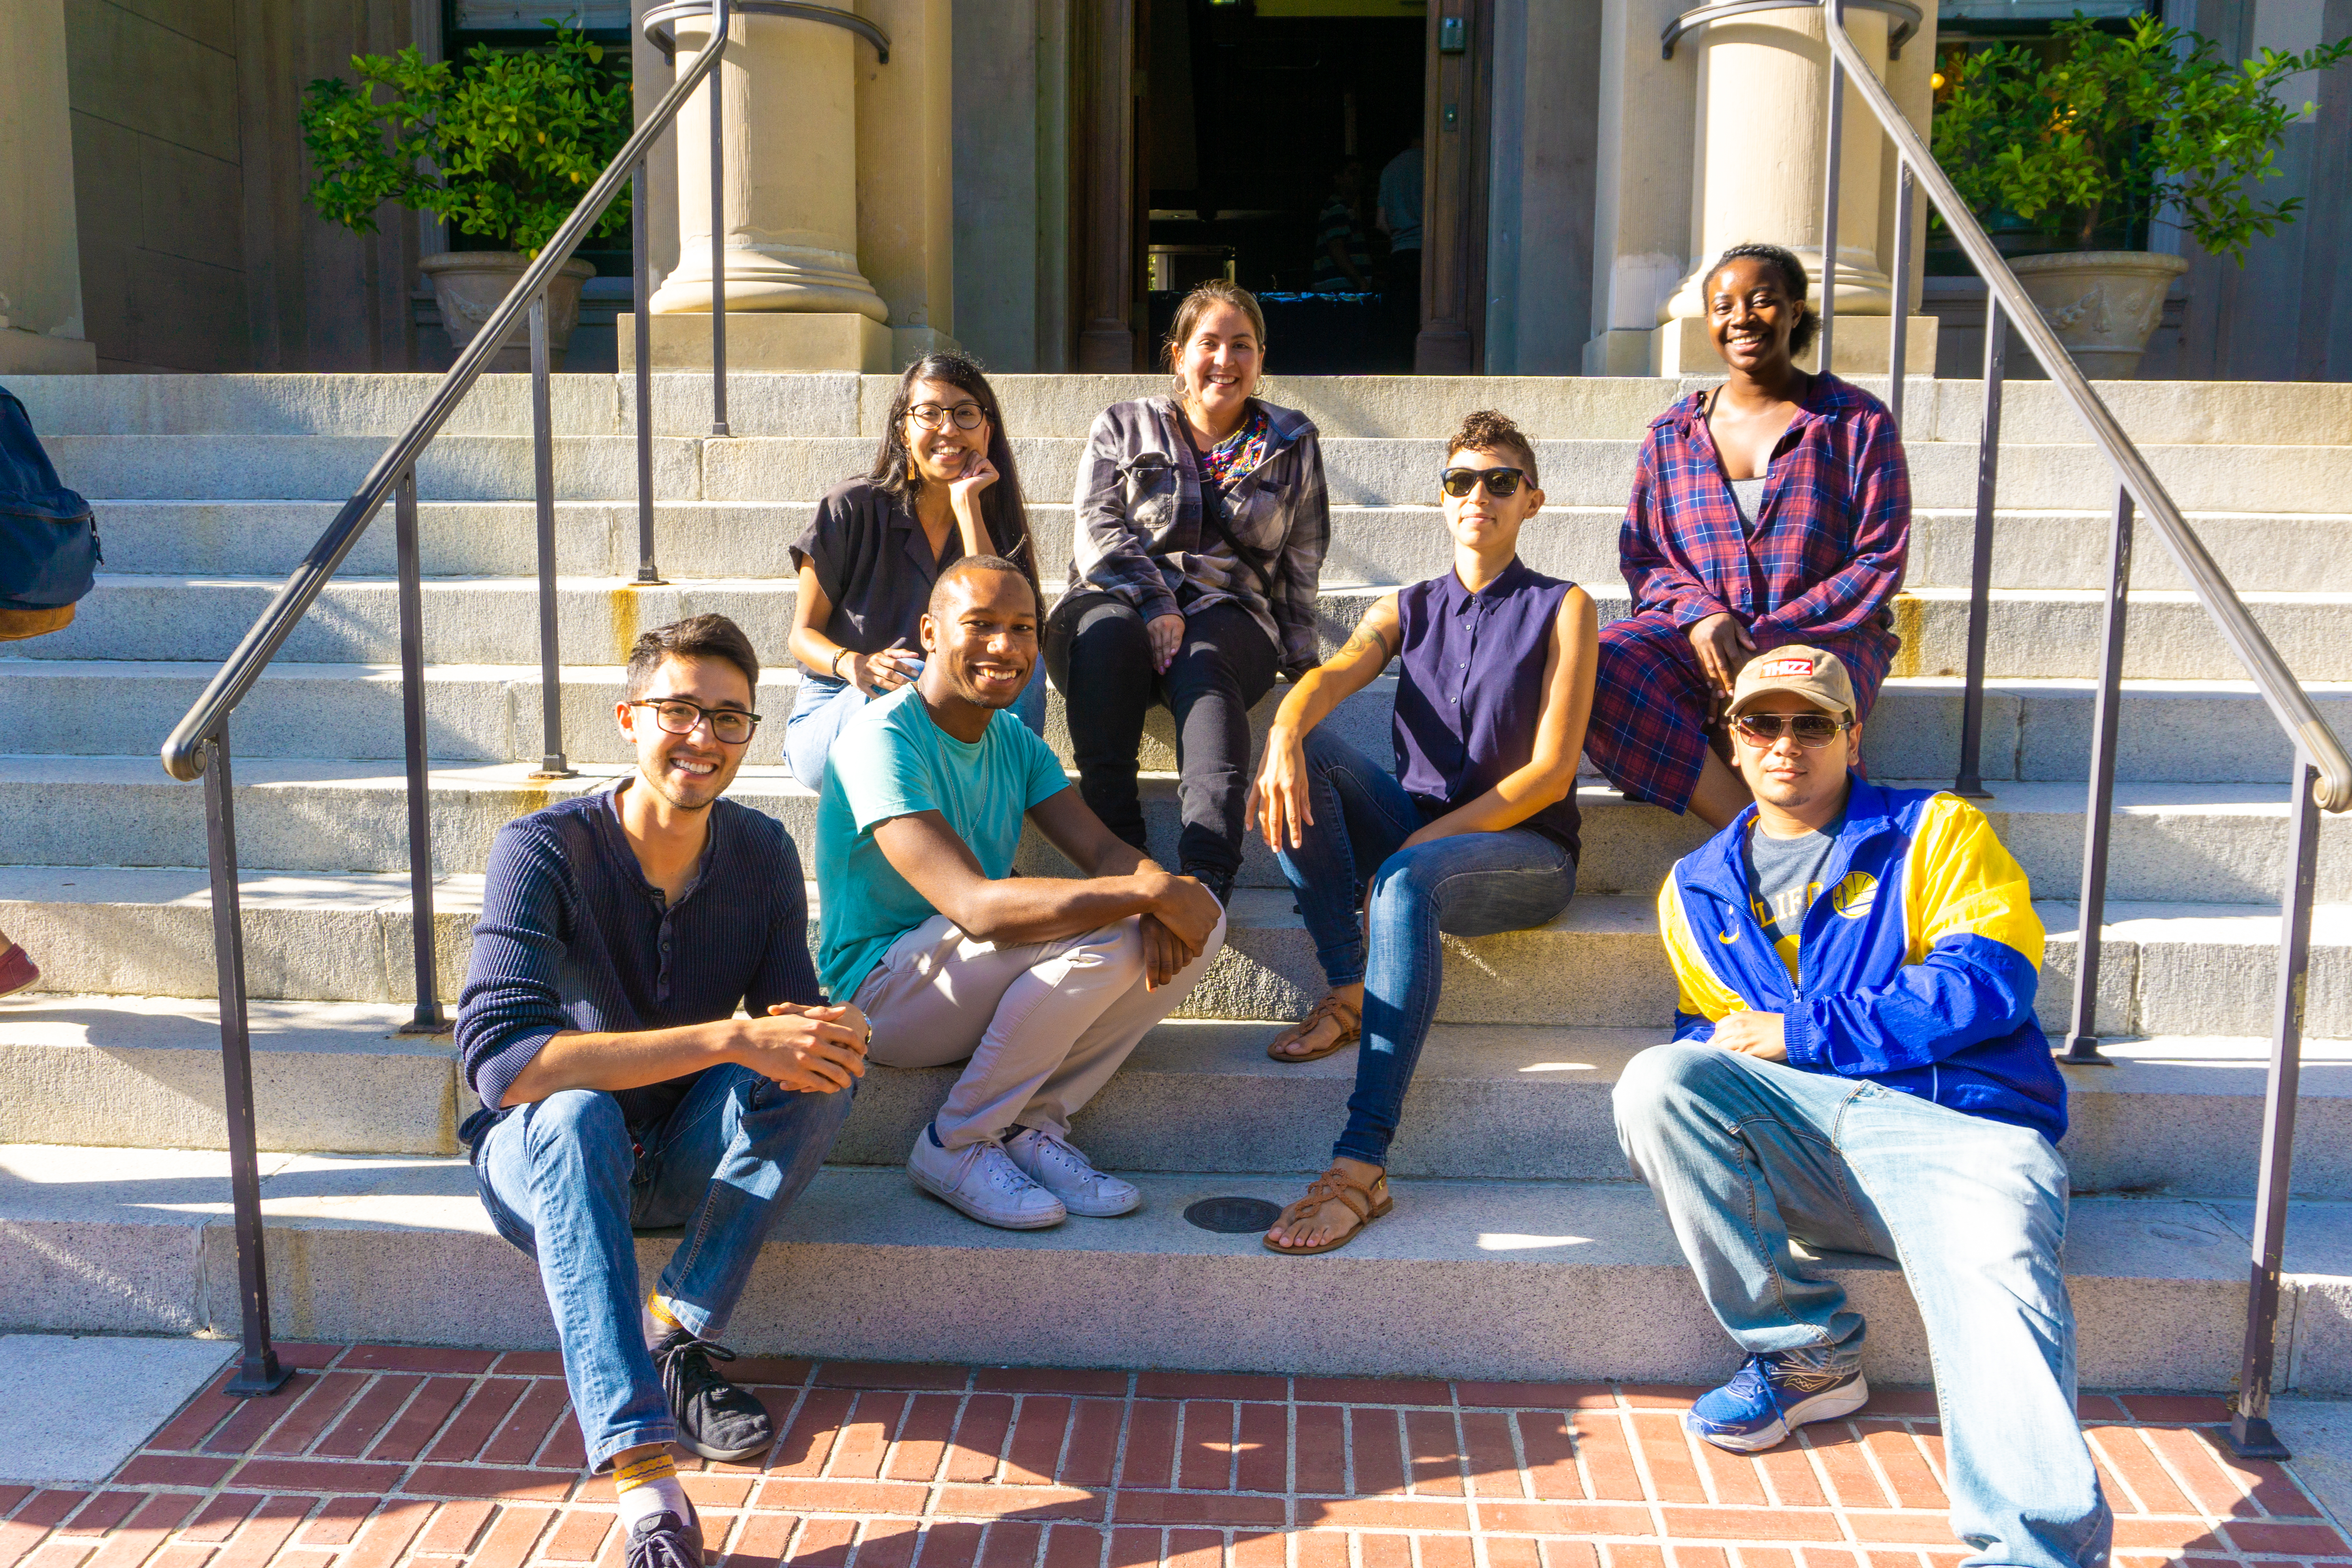 GDC members at the UC Berkeley Diversity and Inclusion event at the Chancellor’s mansion - Fall 2019